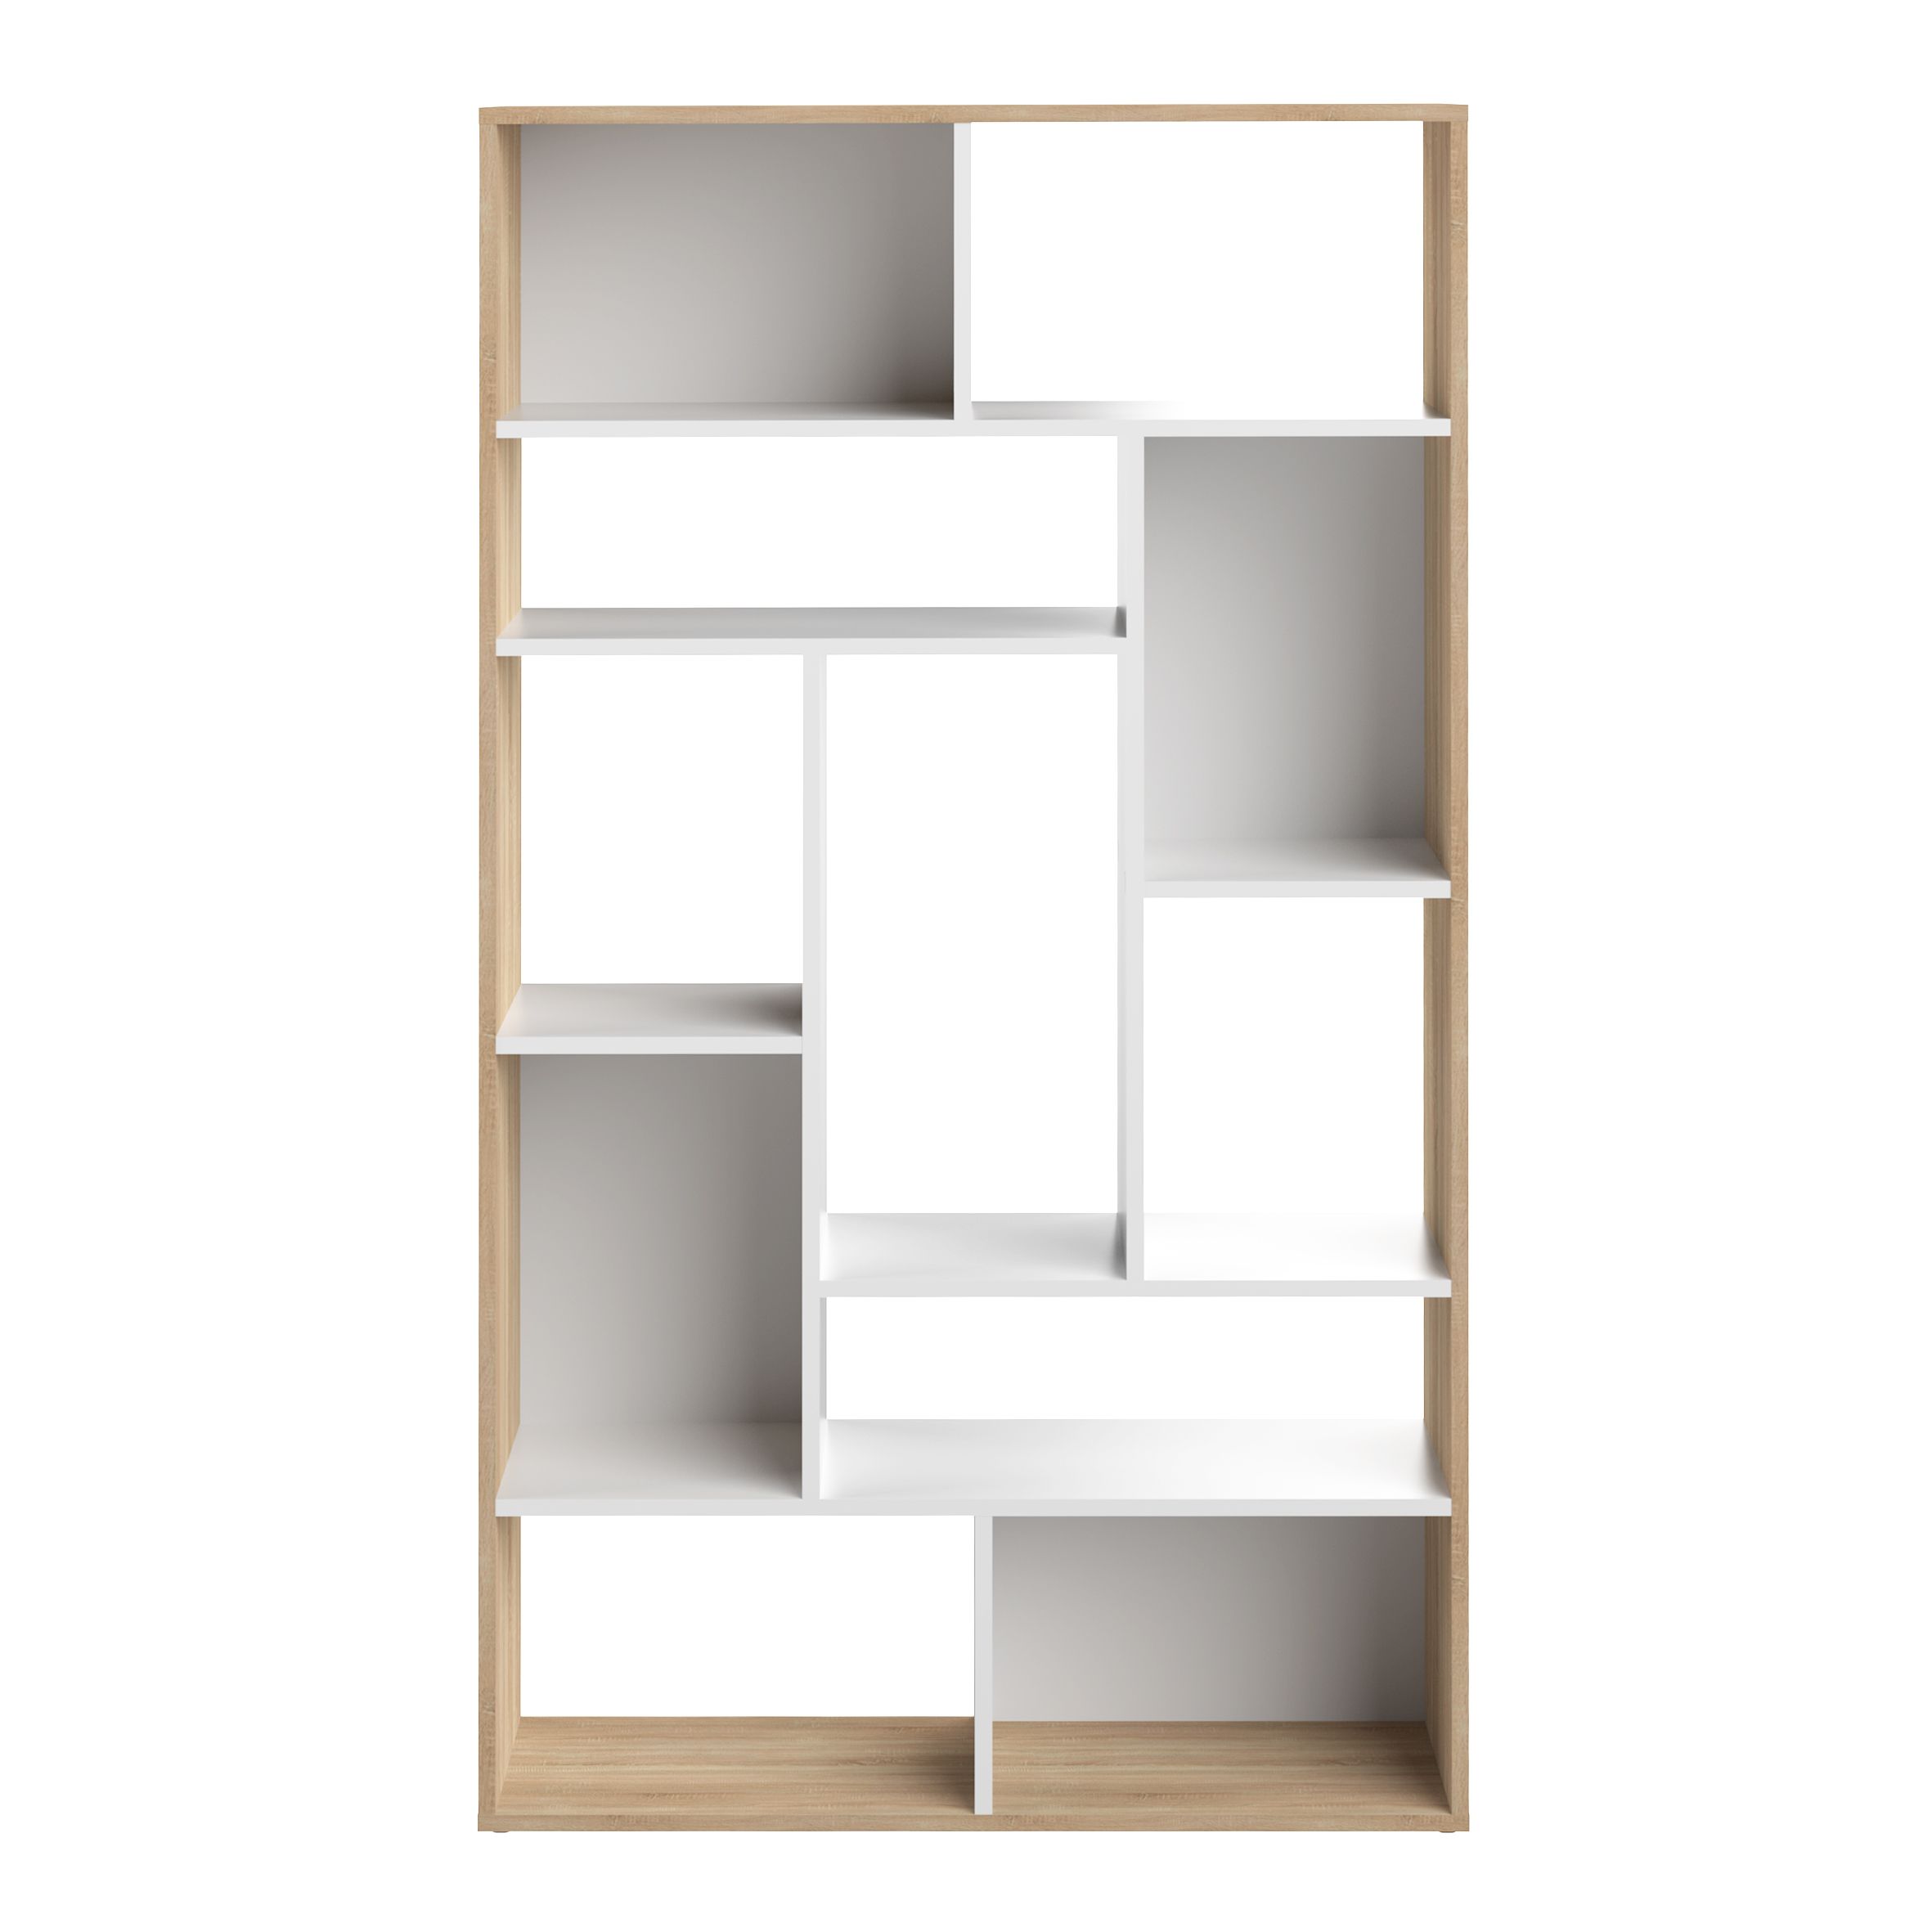 Seoul Bookcase White/Natural Oak by Temahome